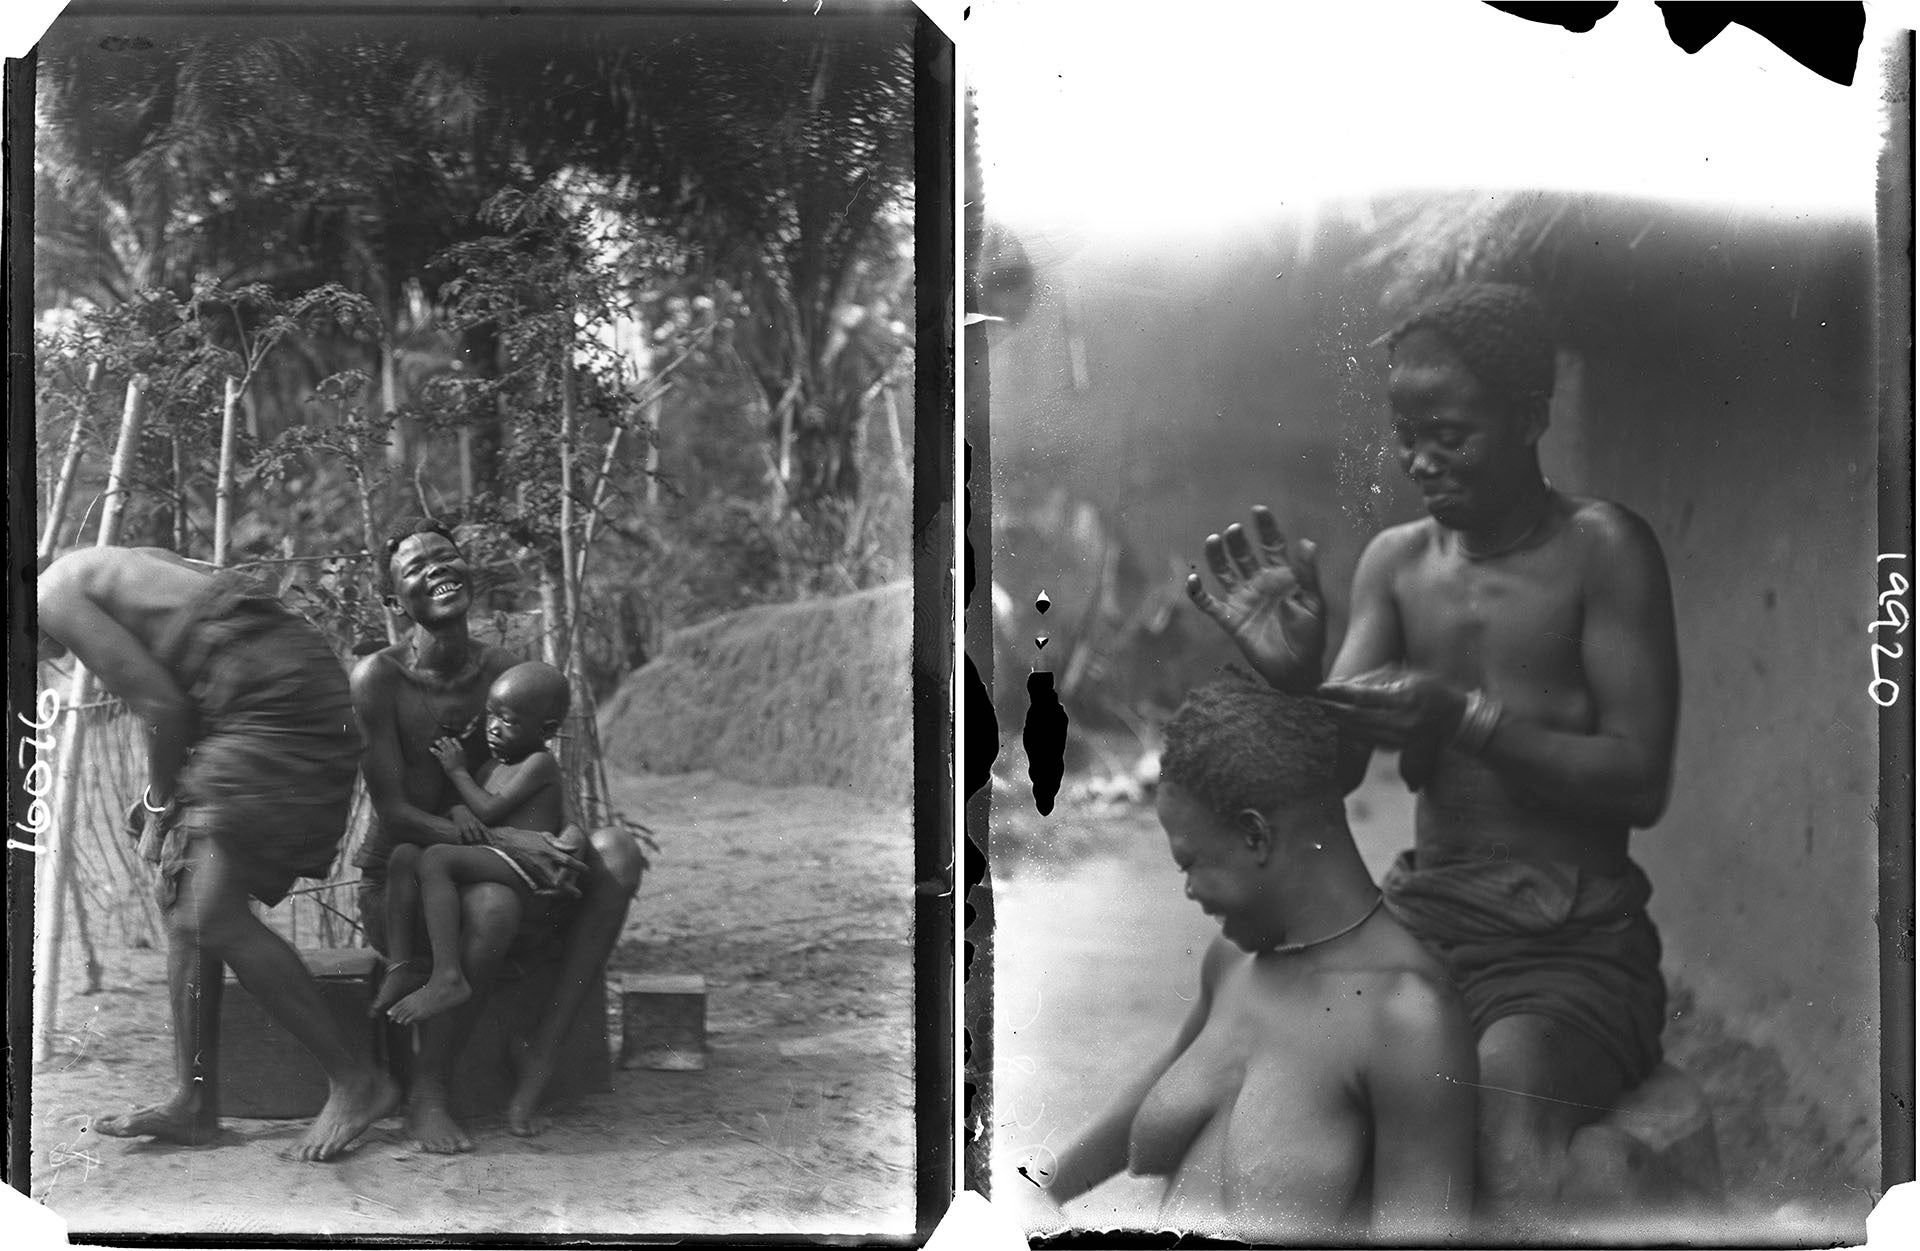 Laughter in the colonial archive? Awka, Southern Nigeria, 1911